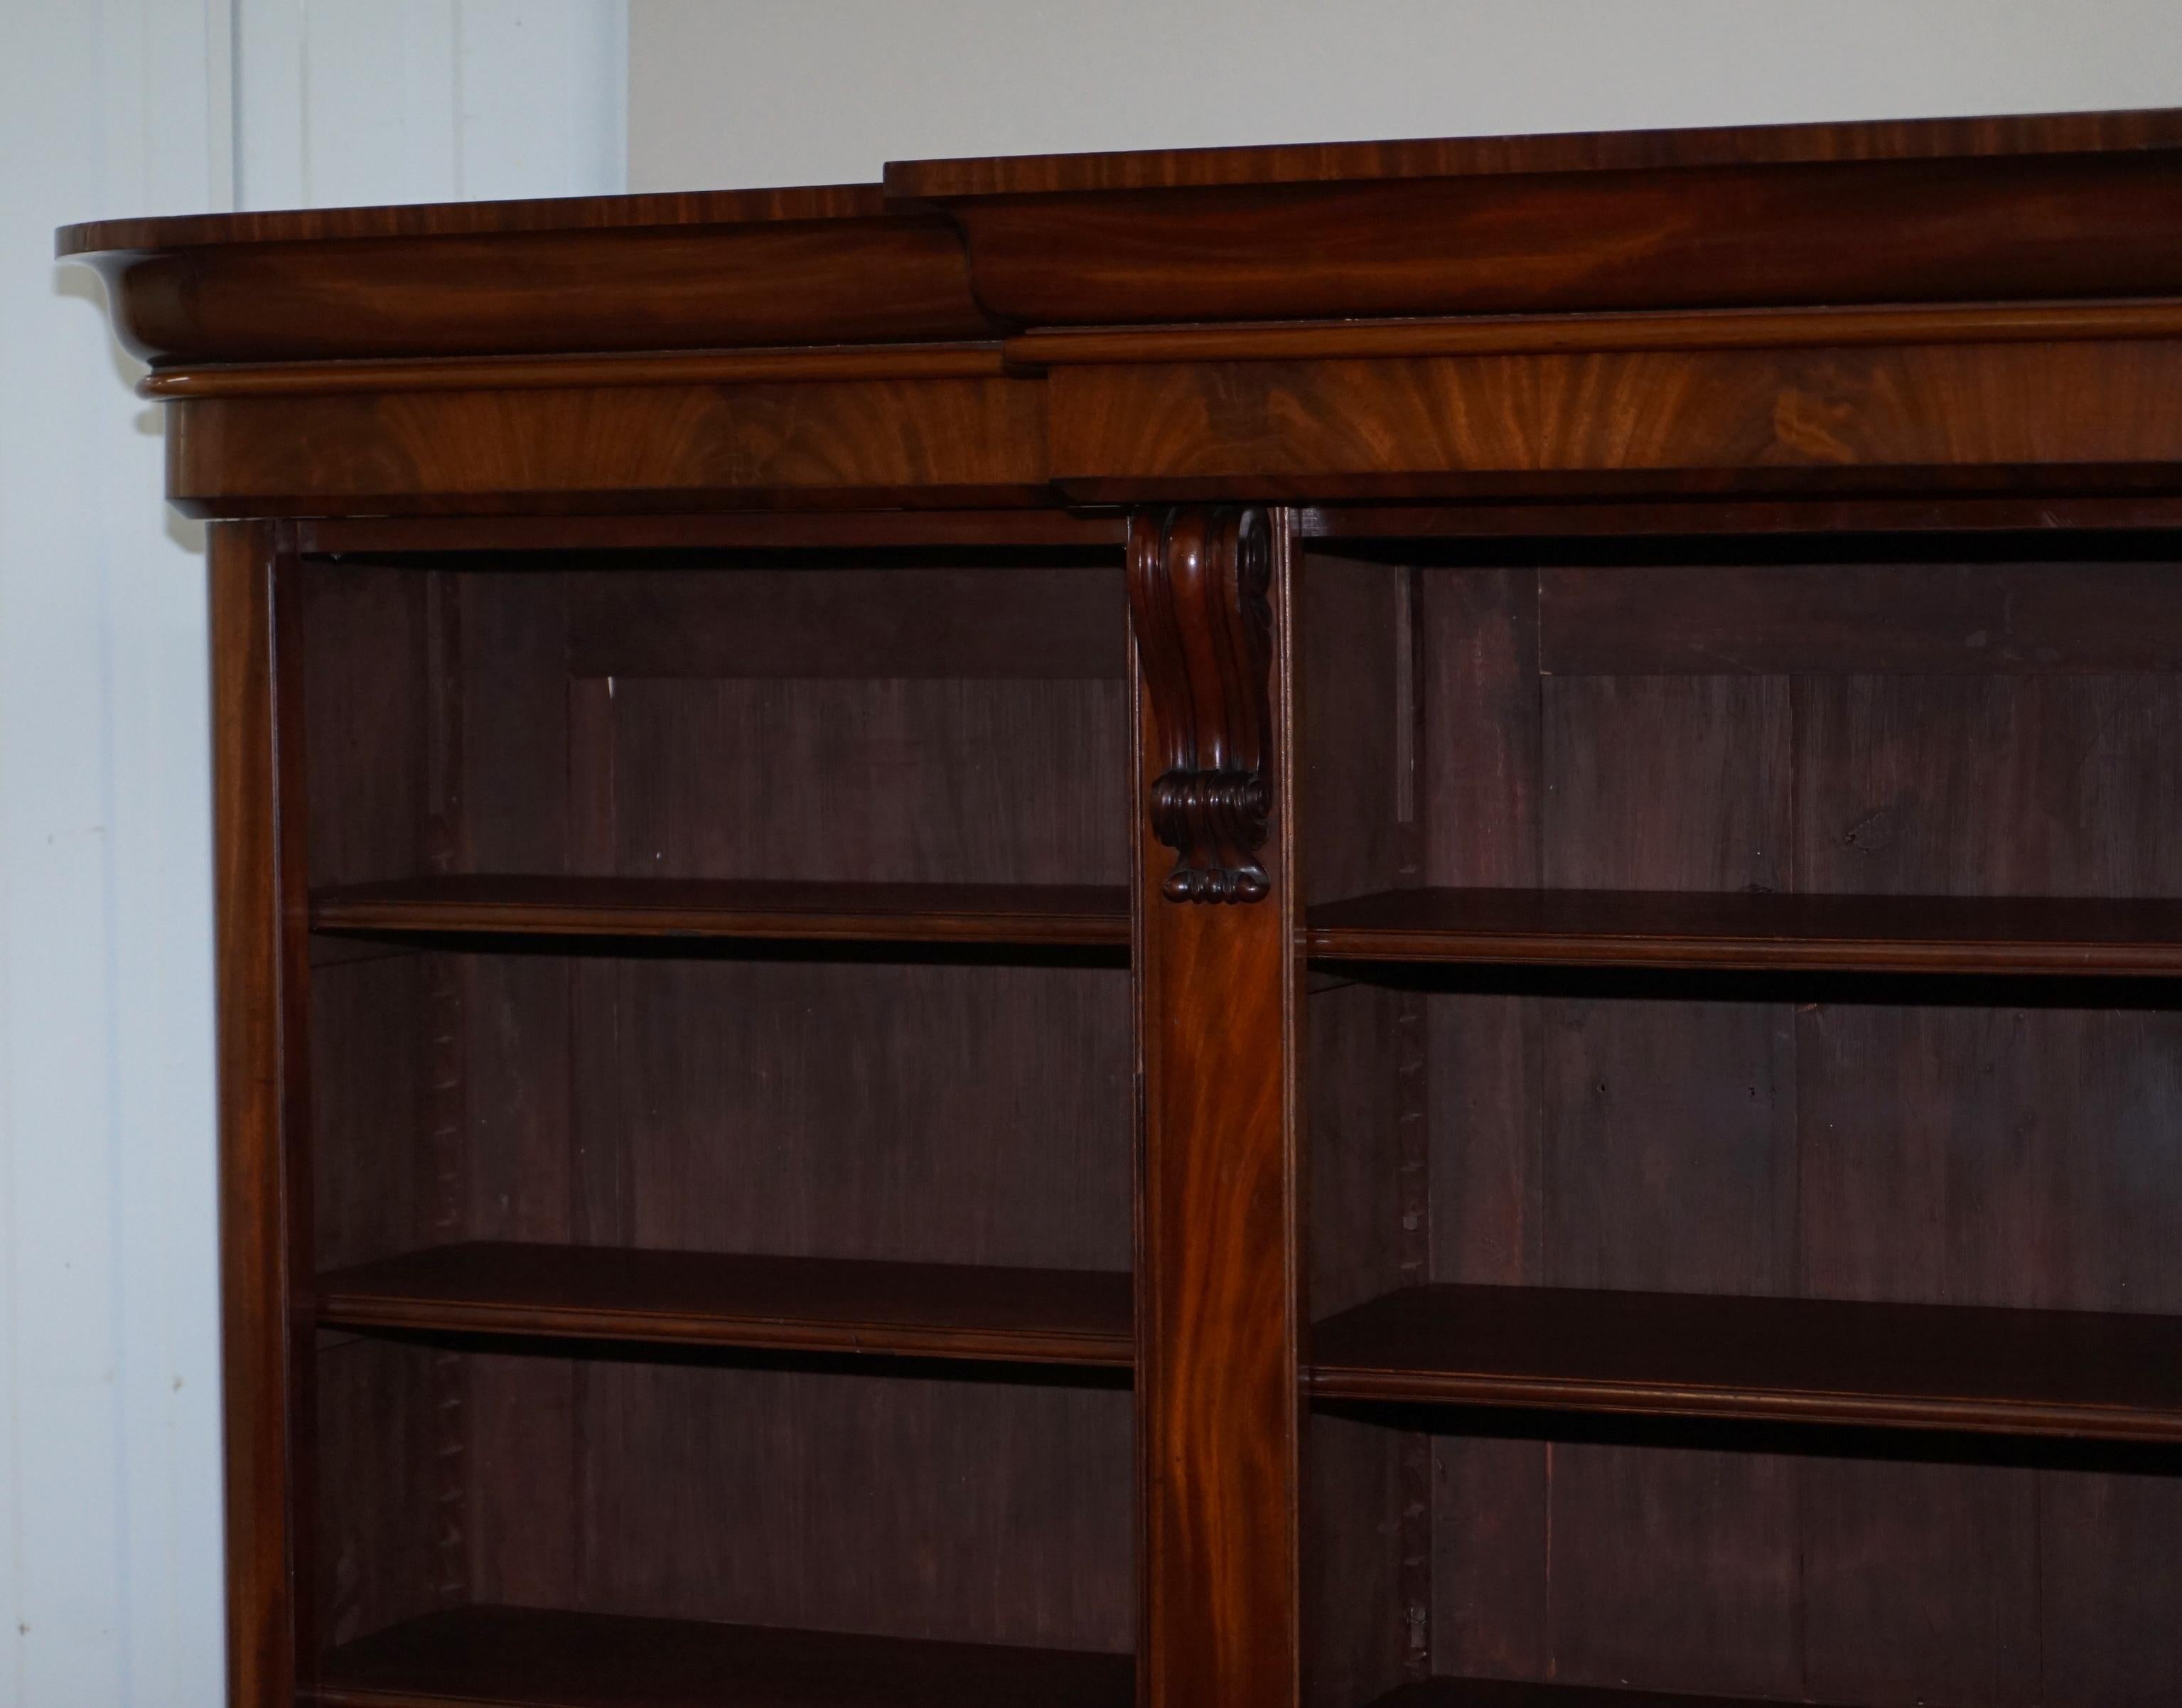 High Victorian Sublime Mid Victorian circa 1860 Mahogany Library Open Breakfront Bookcase